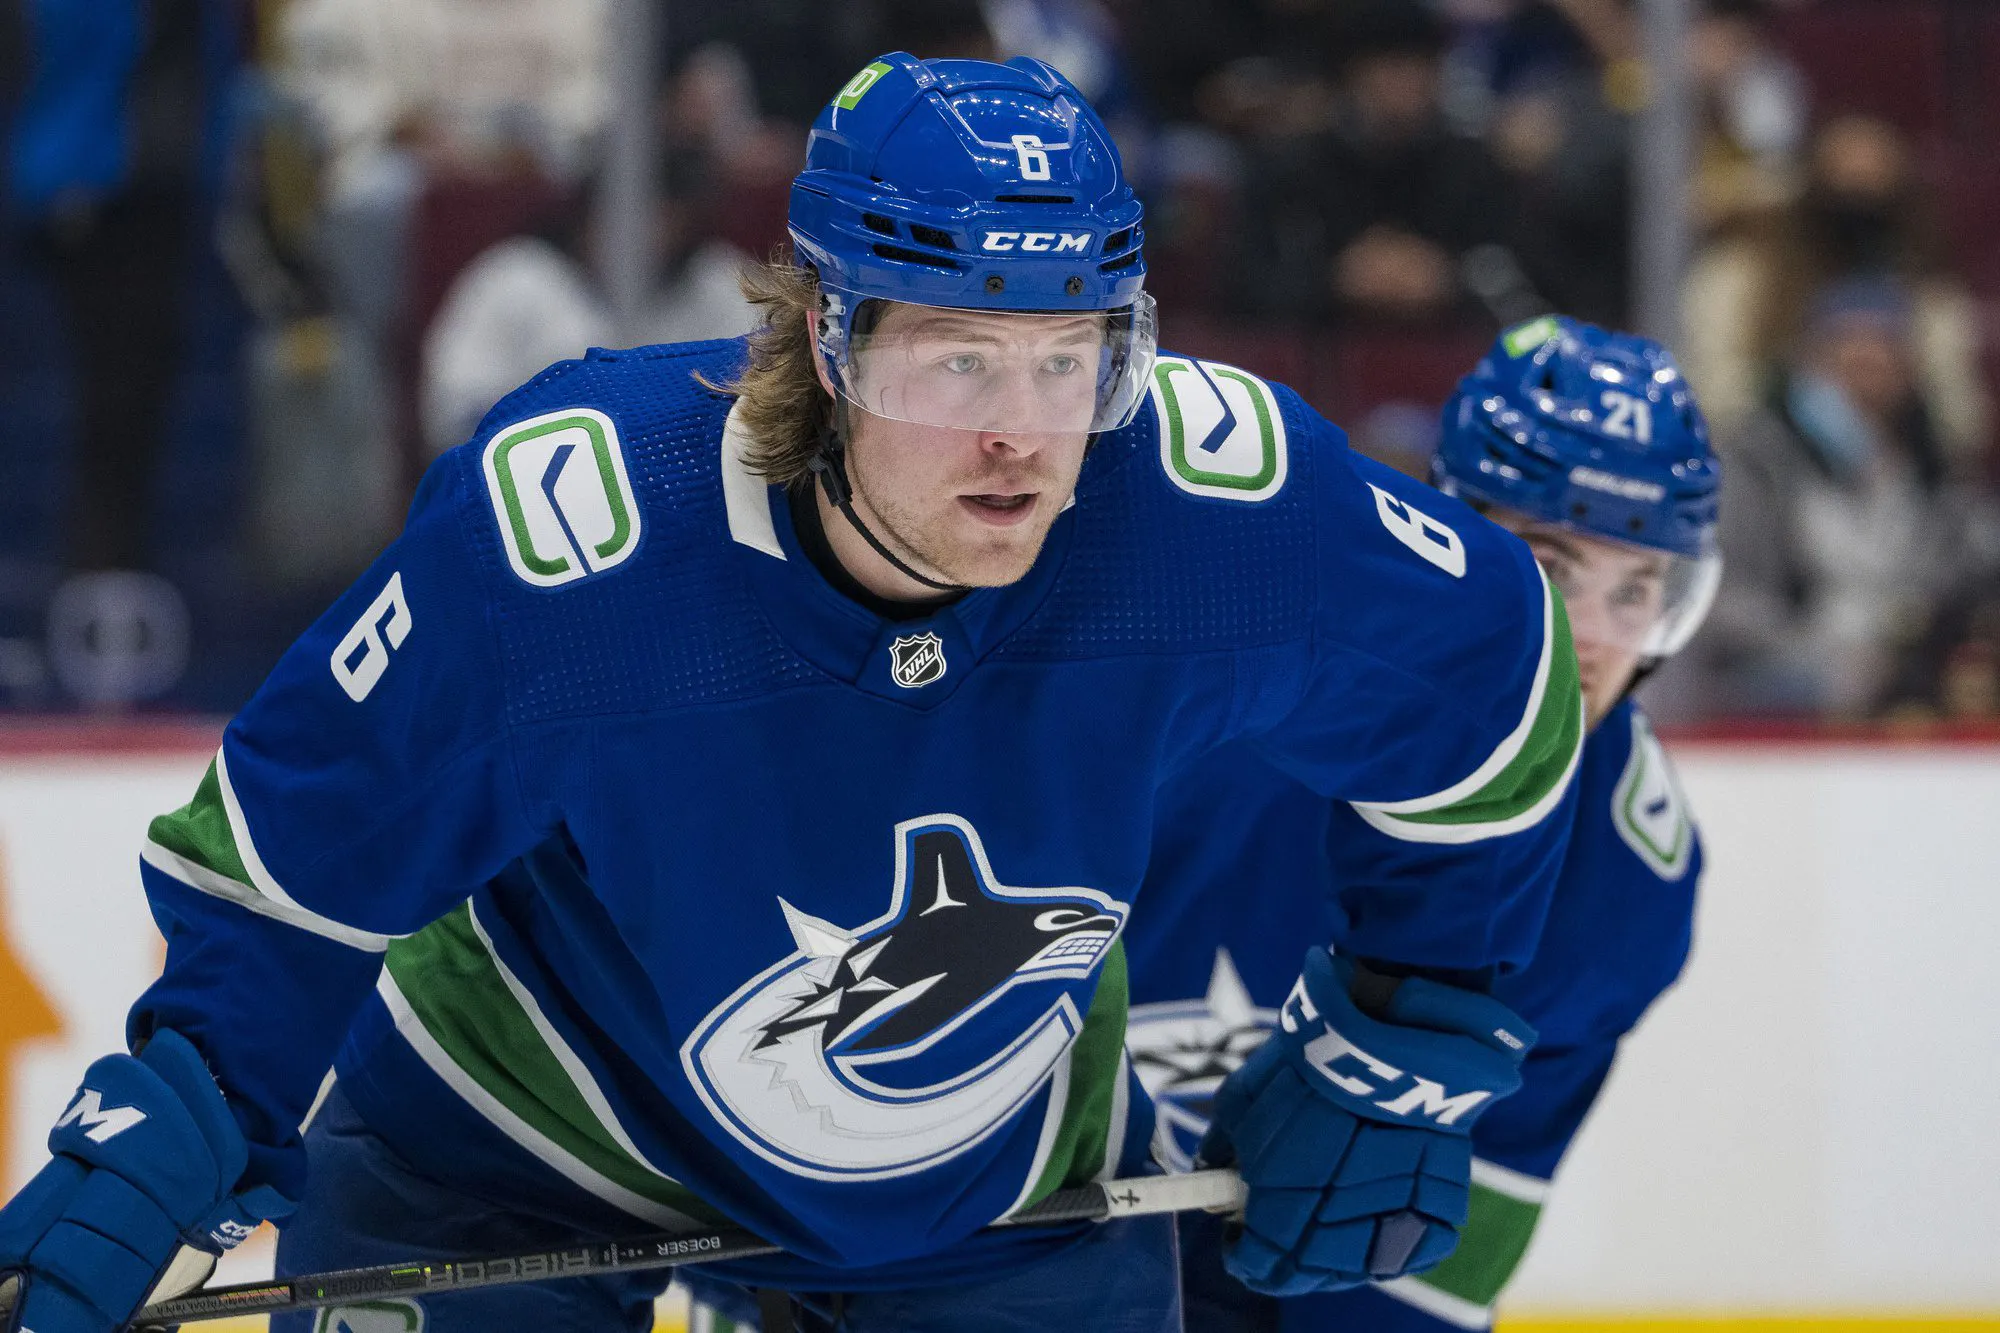 Vancouver Canucks sign Brock Boeser to three year extension with $6.65 million cap hit